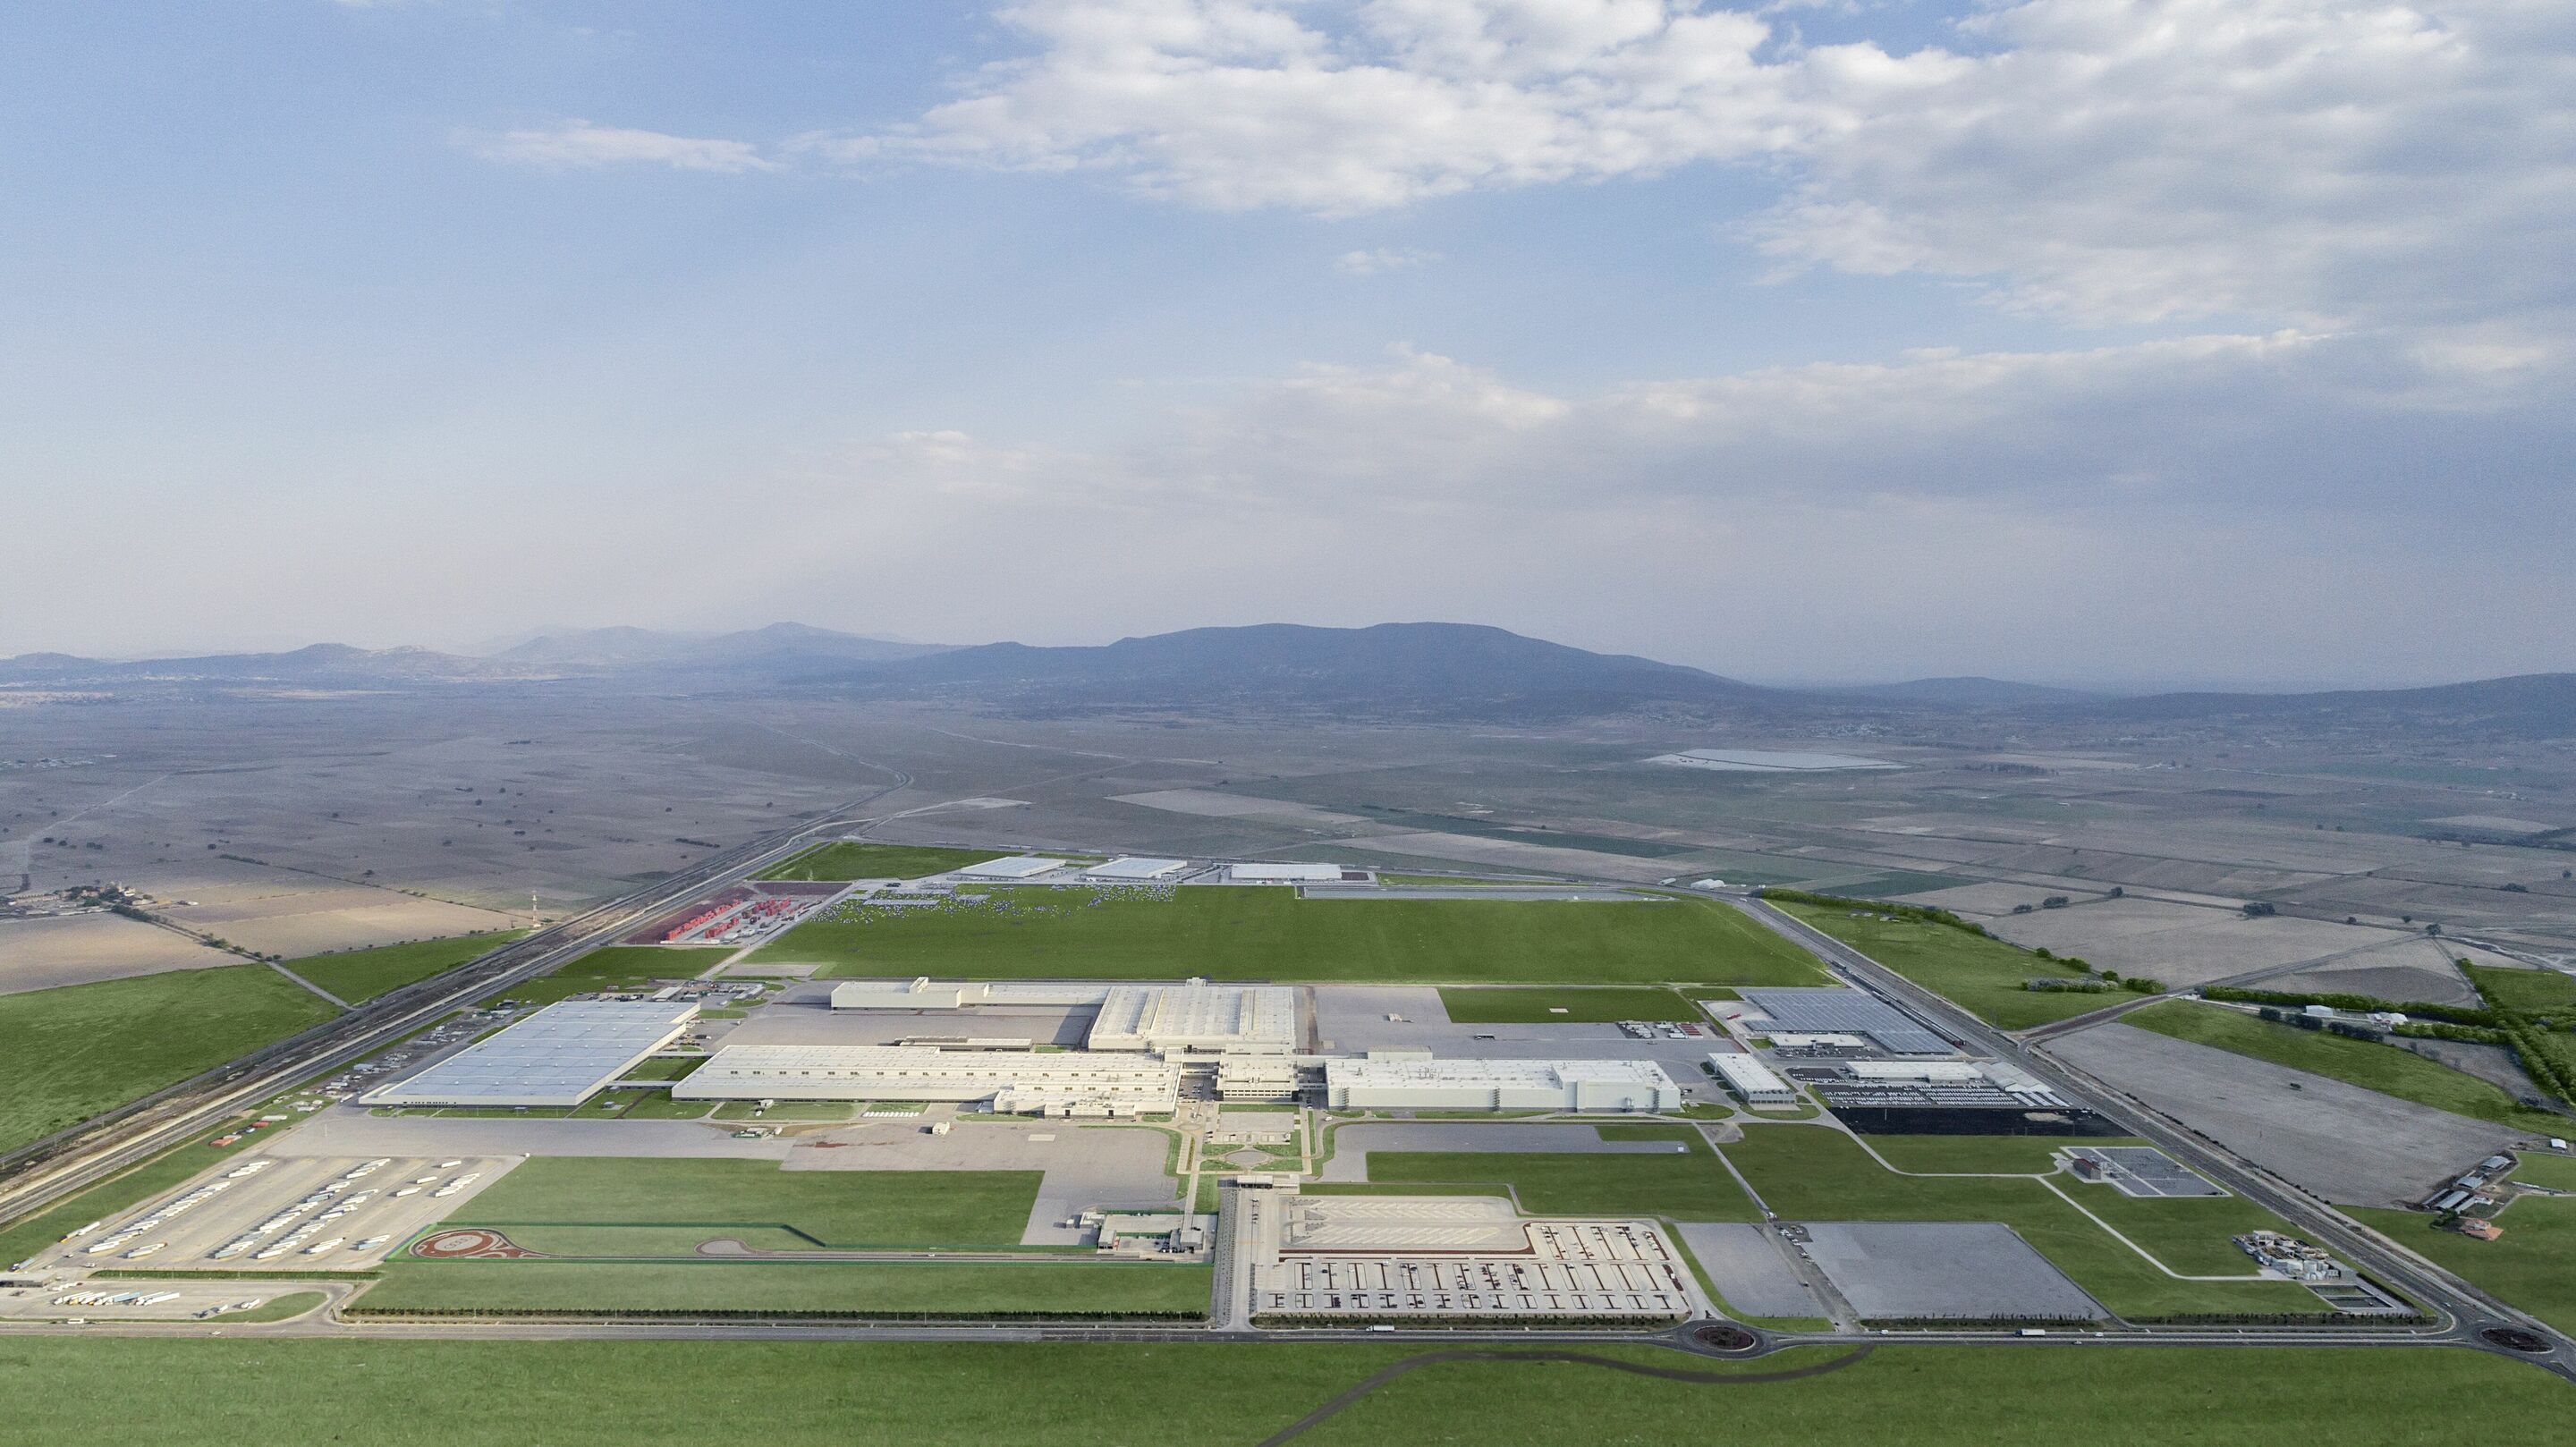 Pioneering work: Audi México produces completely without wastewater